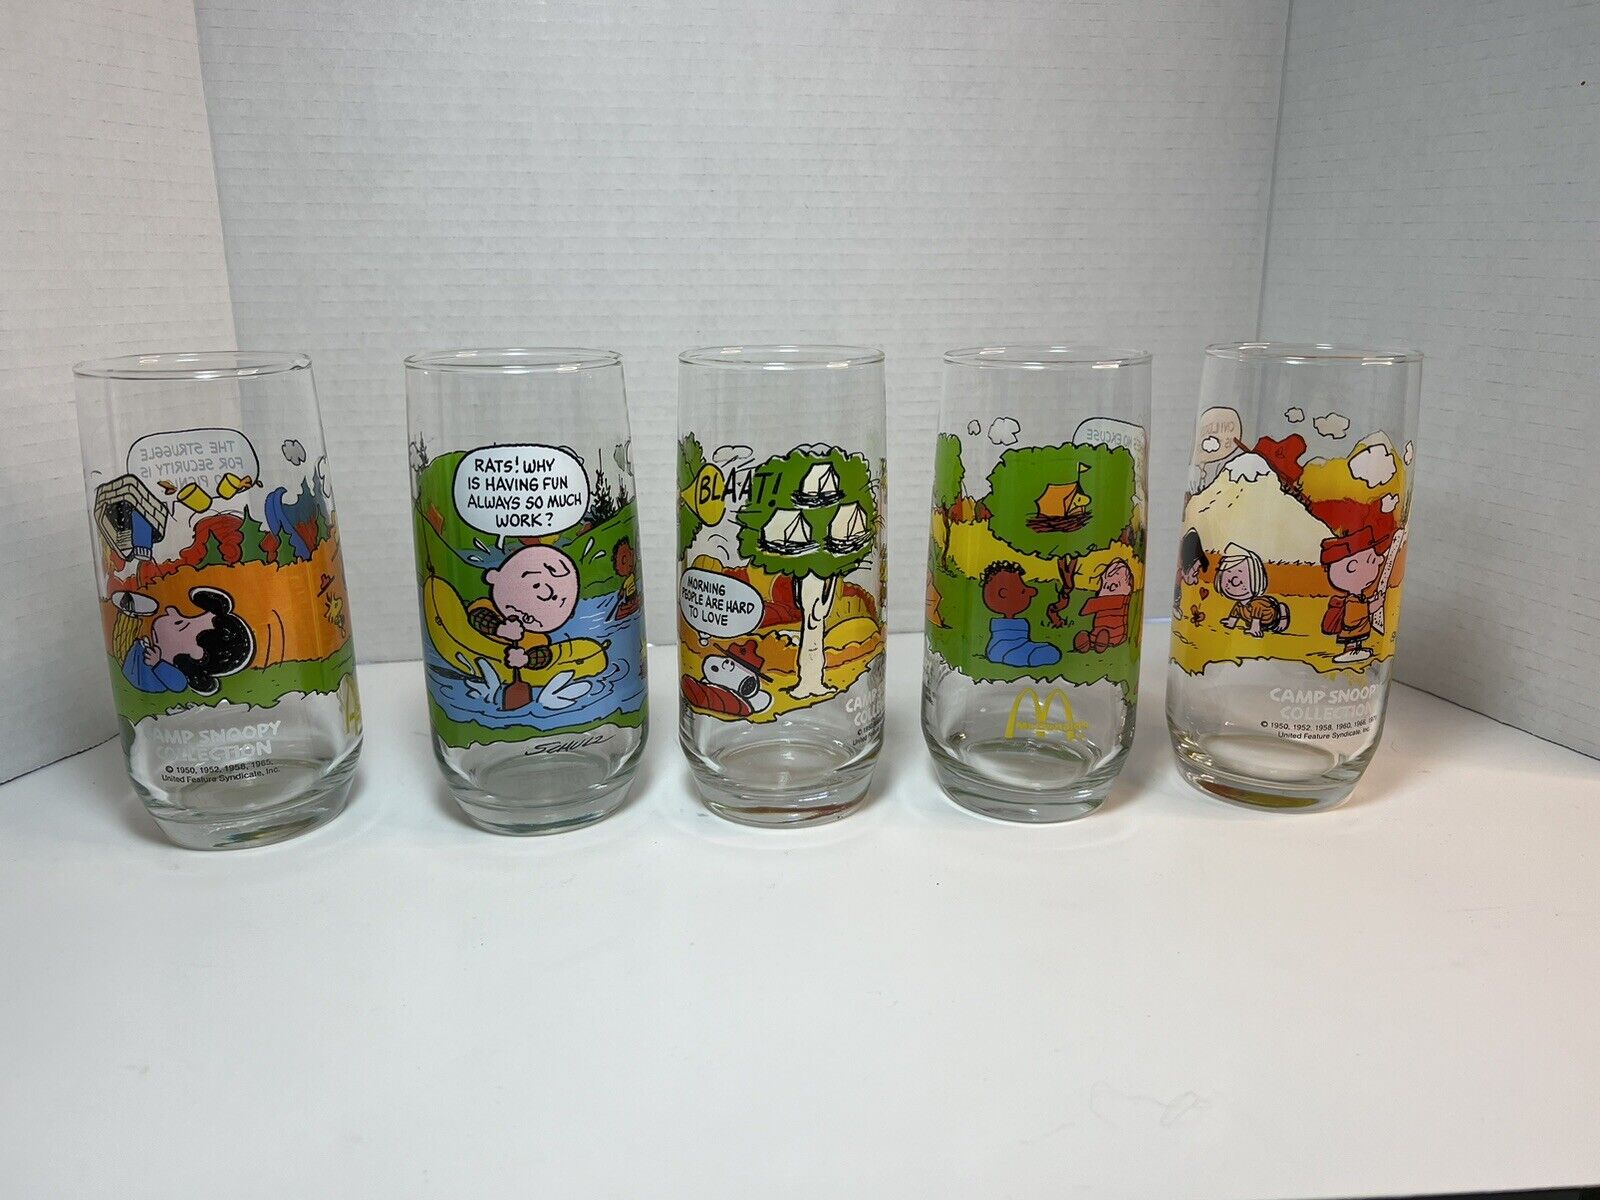 Mcdonalds Peanuts Camp Snoopy Collection Vintage Glasses Set of 5-